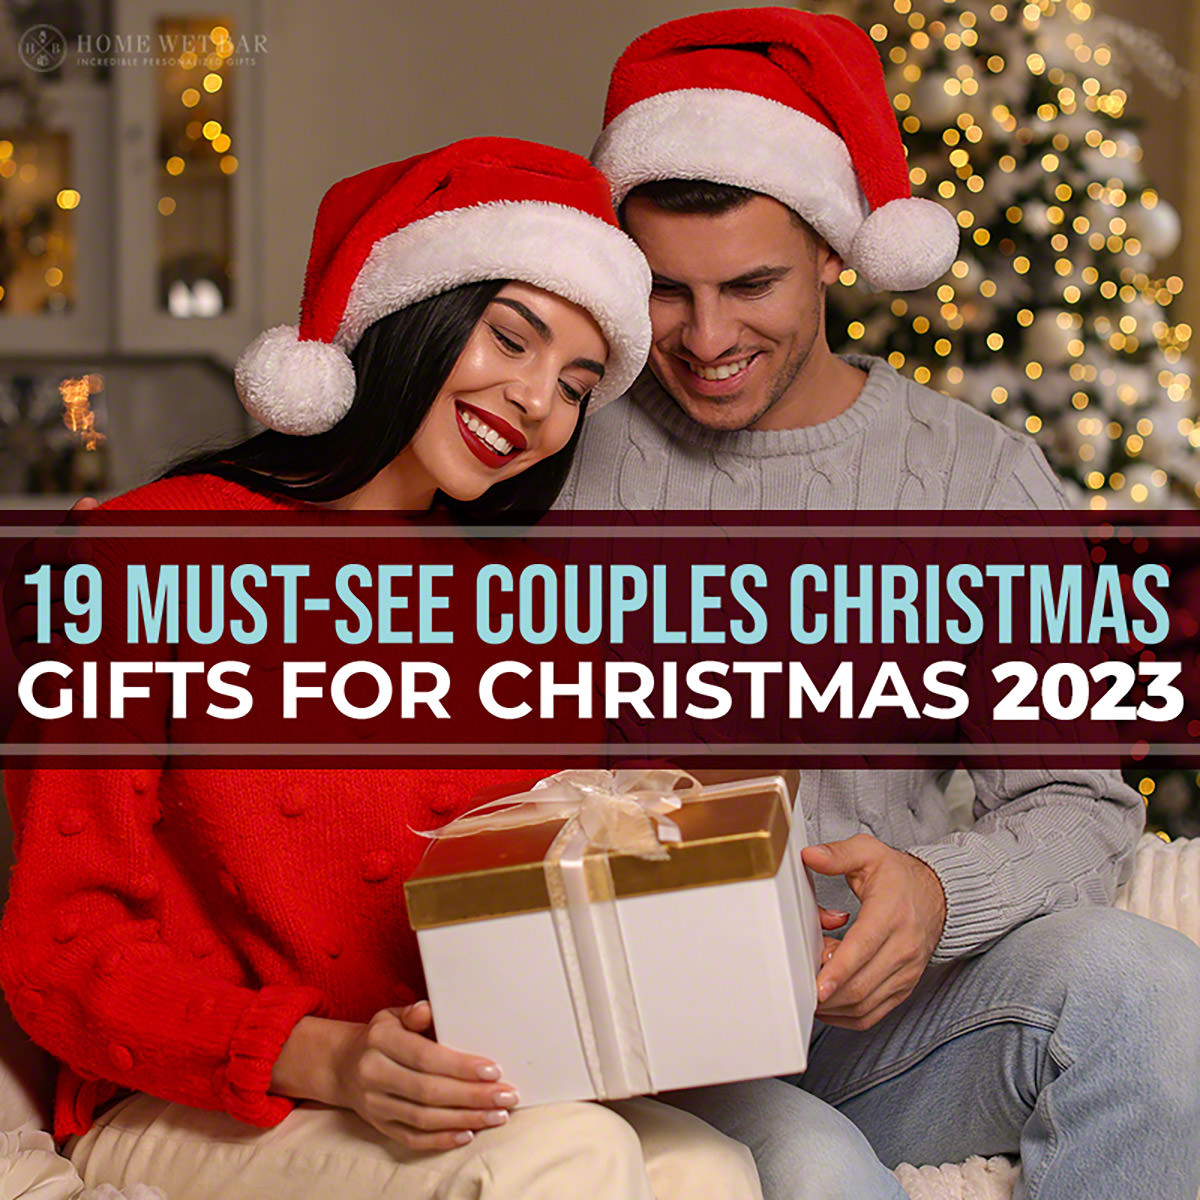 30 Best Couple Gifts 2023 - Cute Gift Ideas for Couples